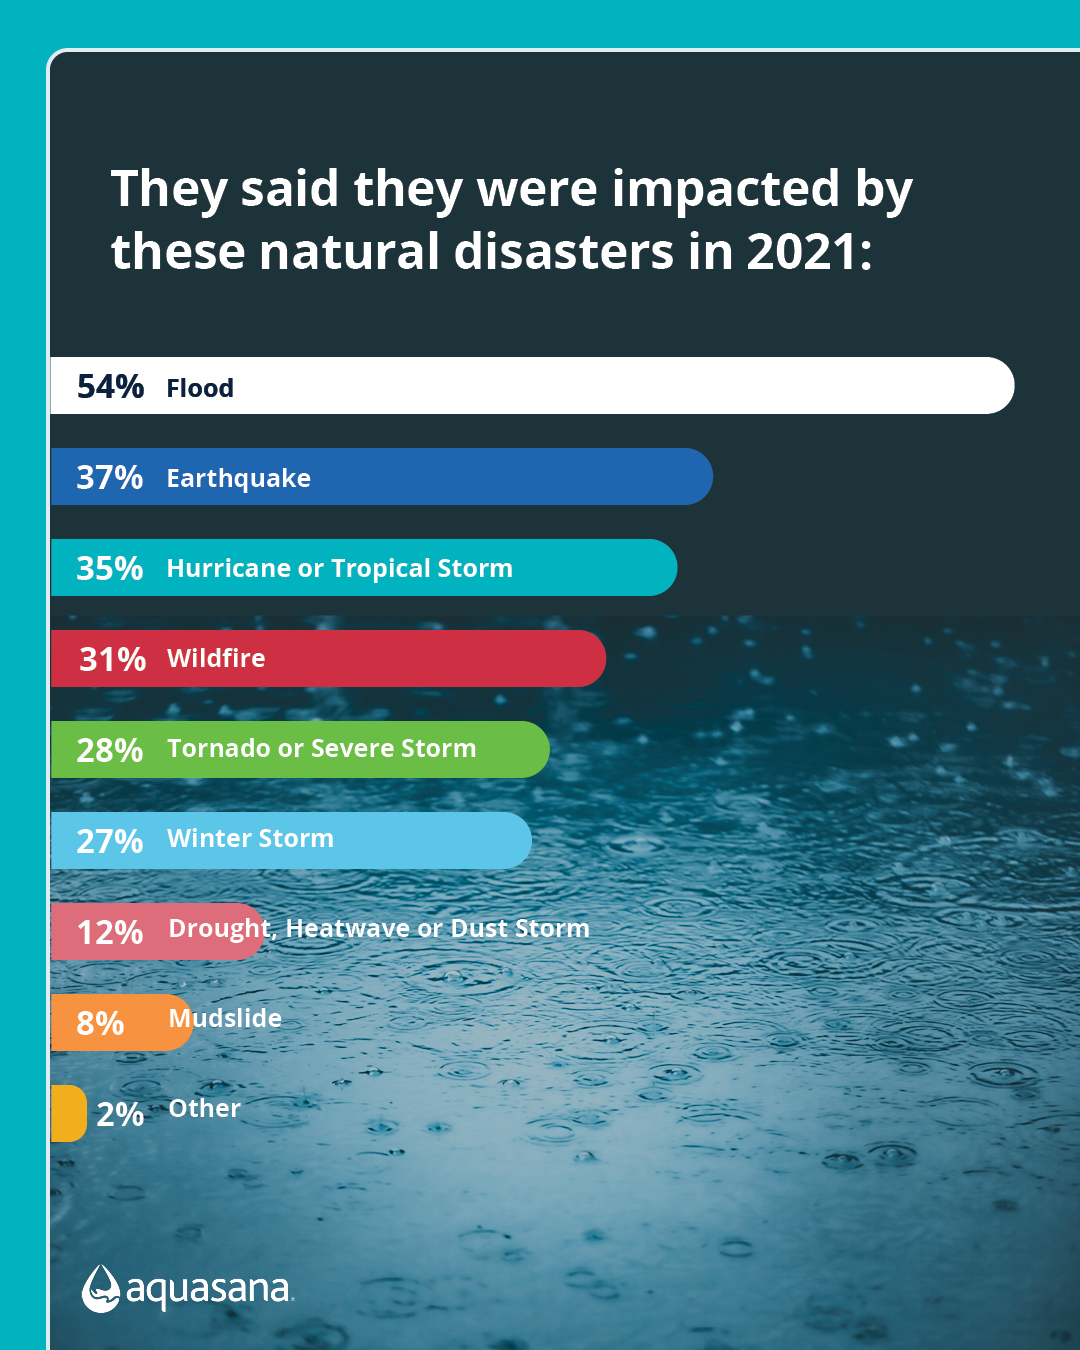 Flooding was the most common type of natural disaster reported in 2021, followed by earthquakes and hurricanes or tropical storms.